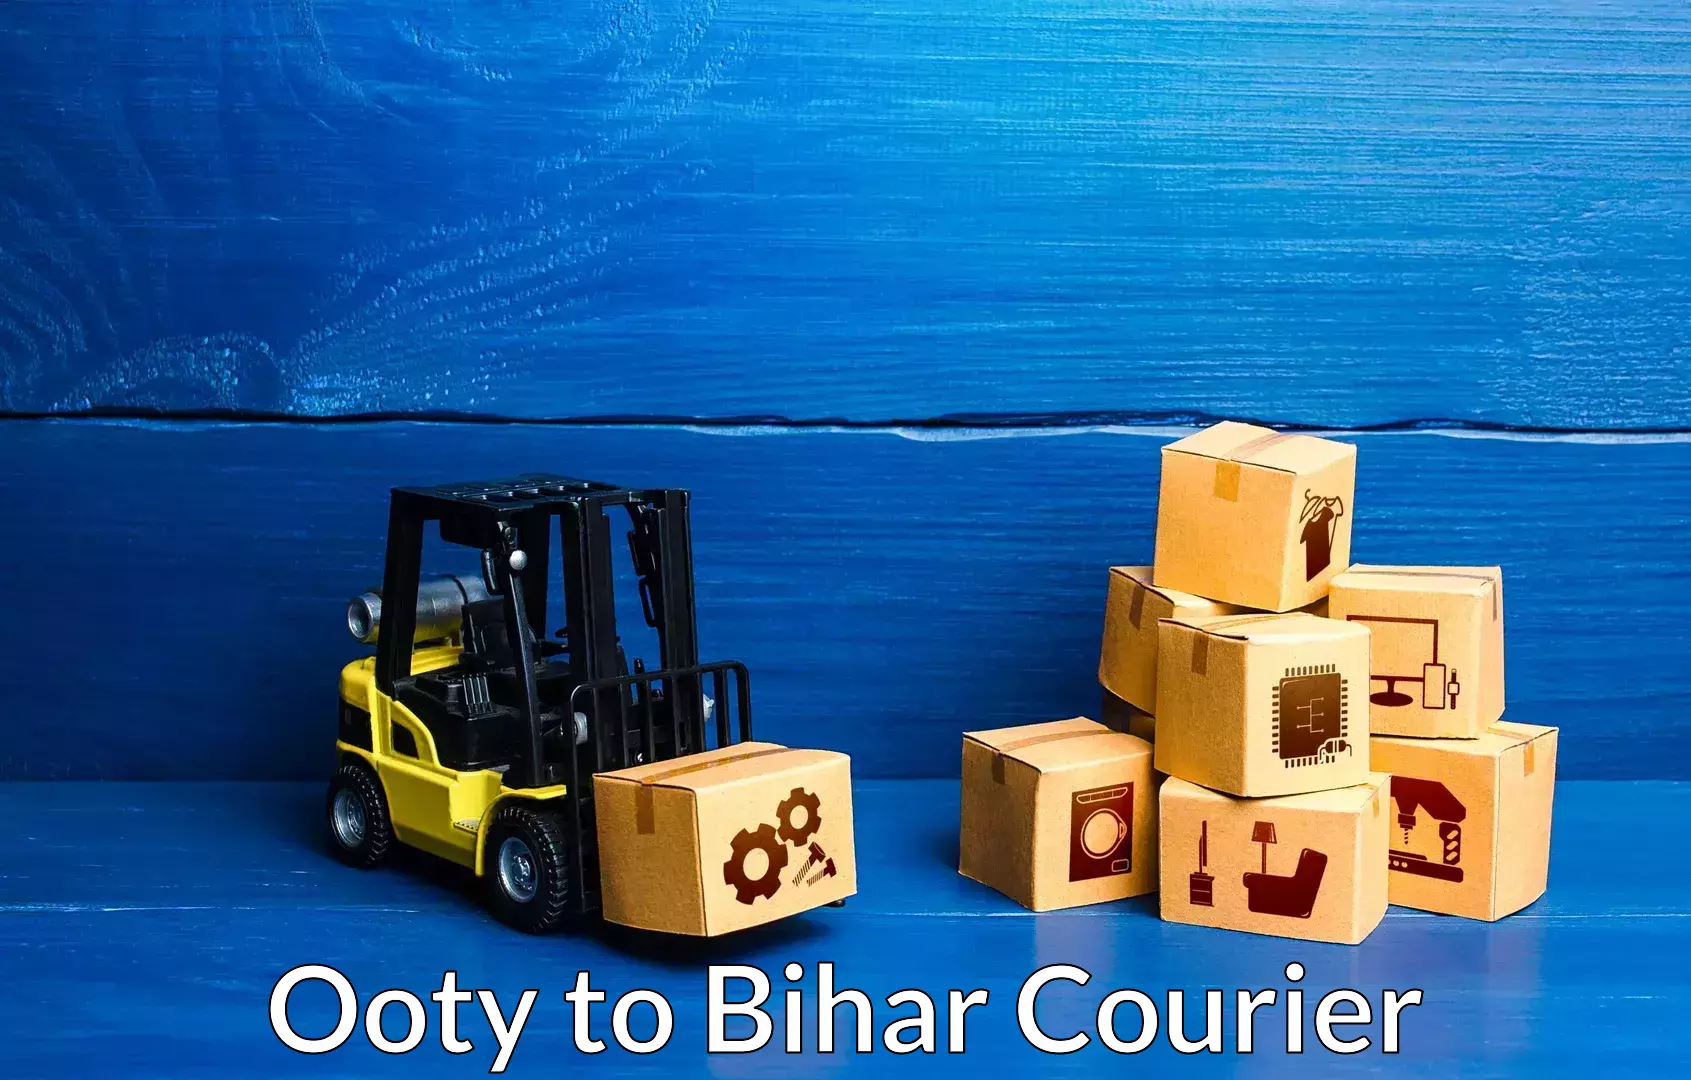 Furniture delivery service Ooty to Baniapur